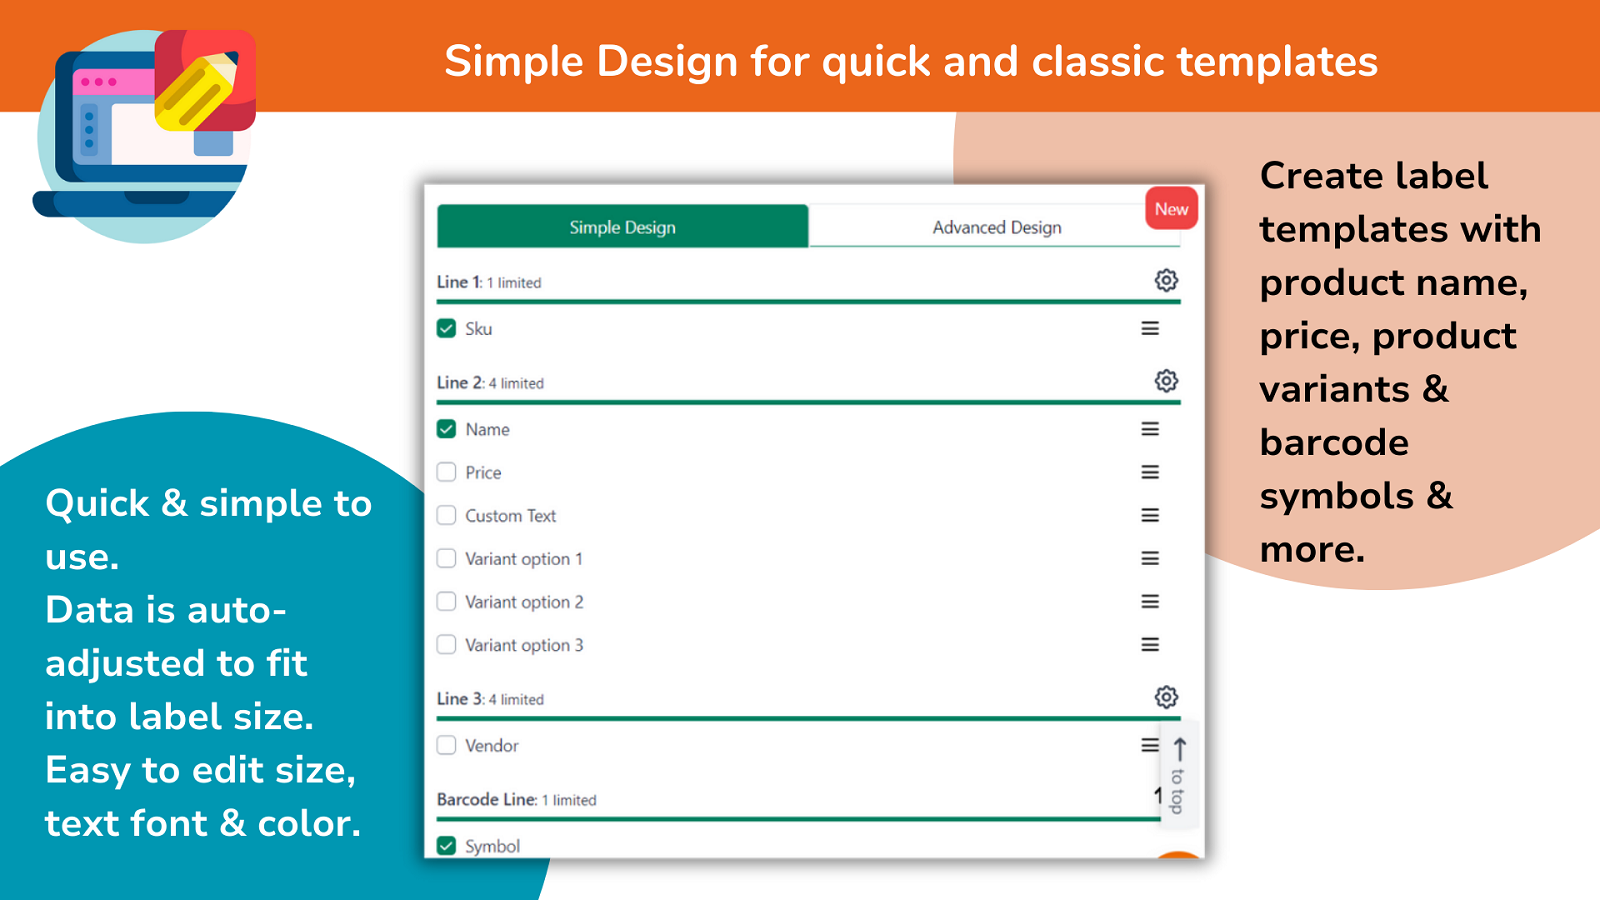 Simple Design for quick and classic templates